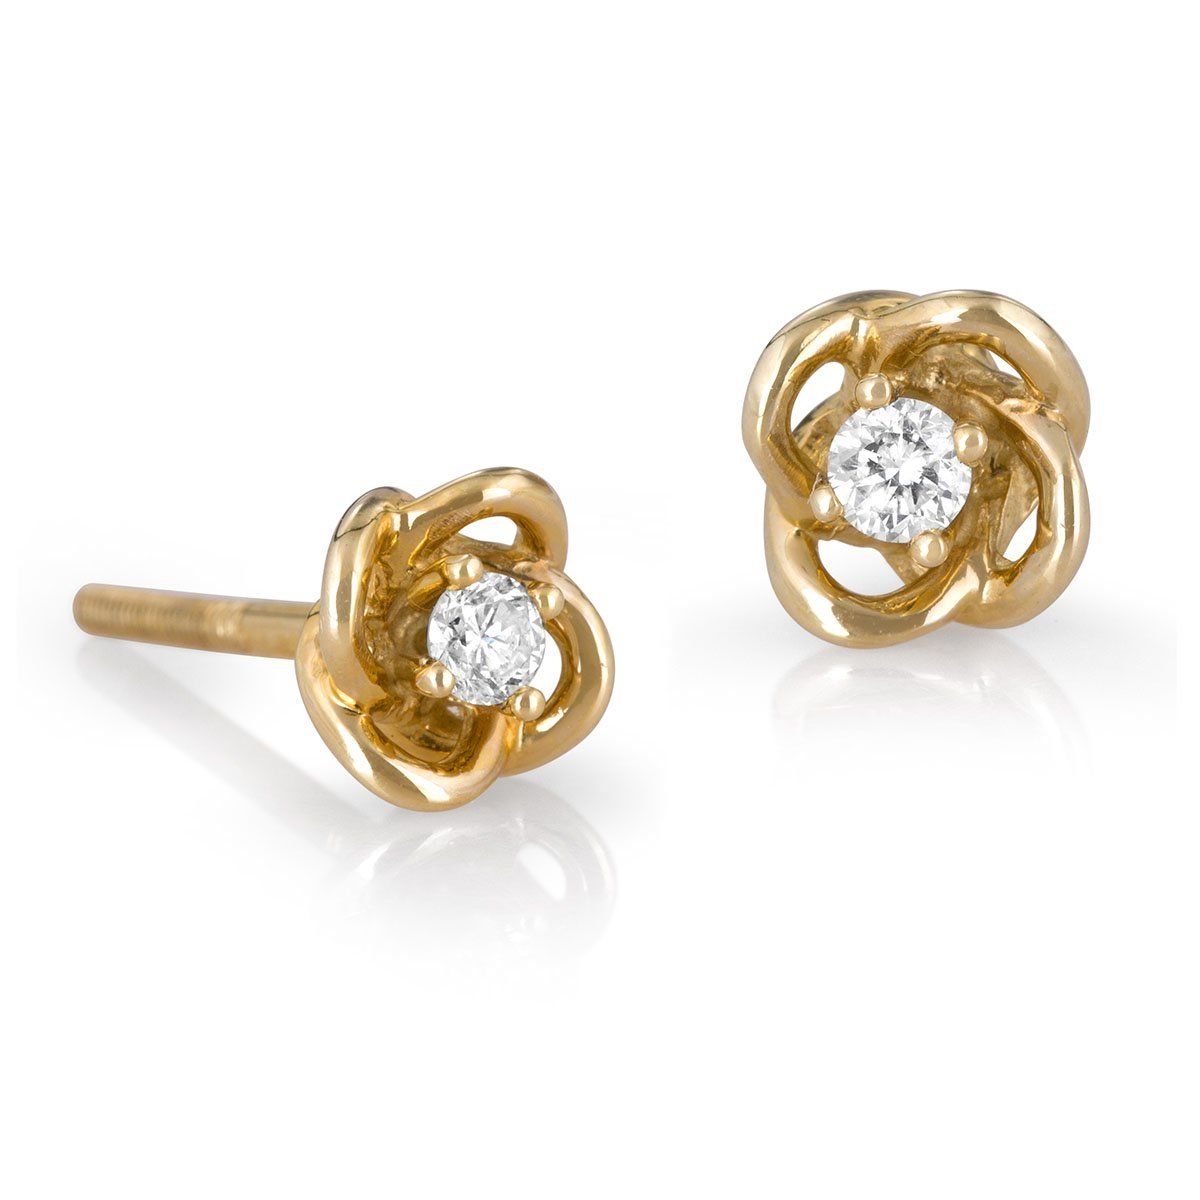 14K Gold 4-Pronged Diamond Stud Earrings With Chic Flower Design (Choice of Color) - 1